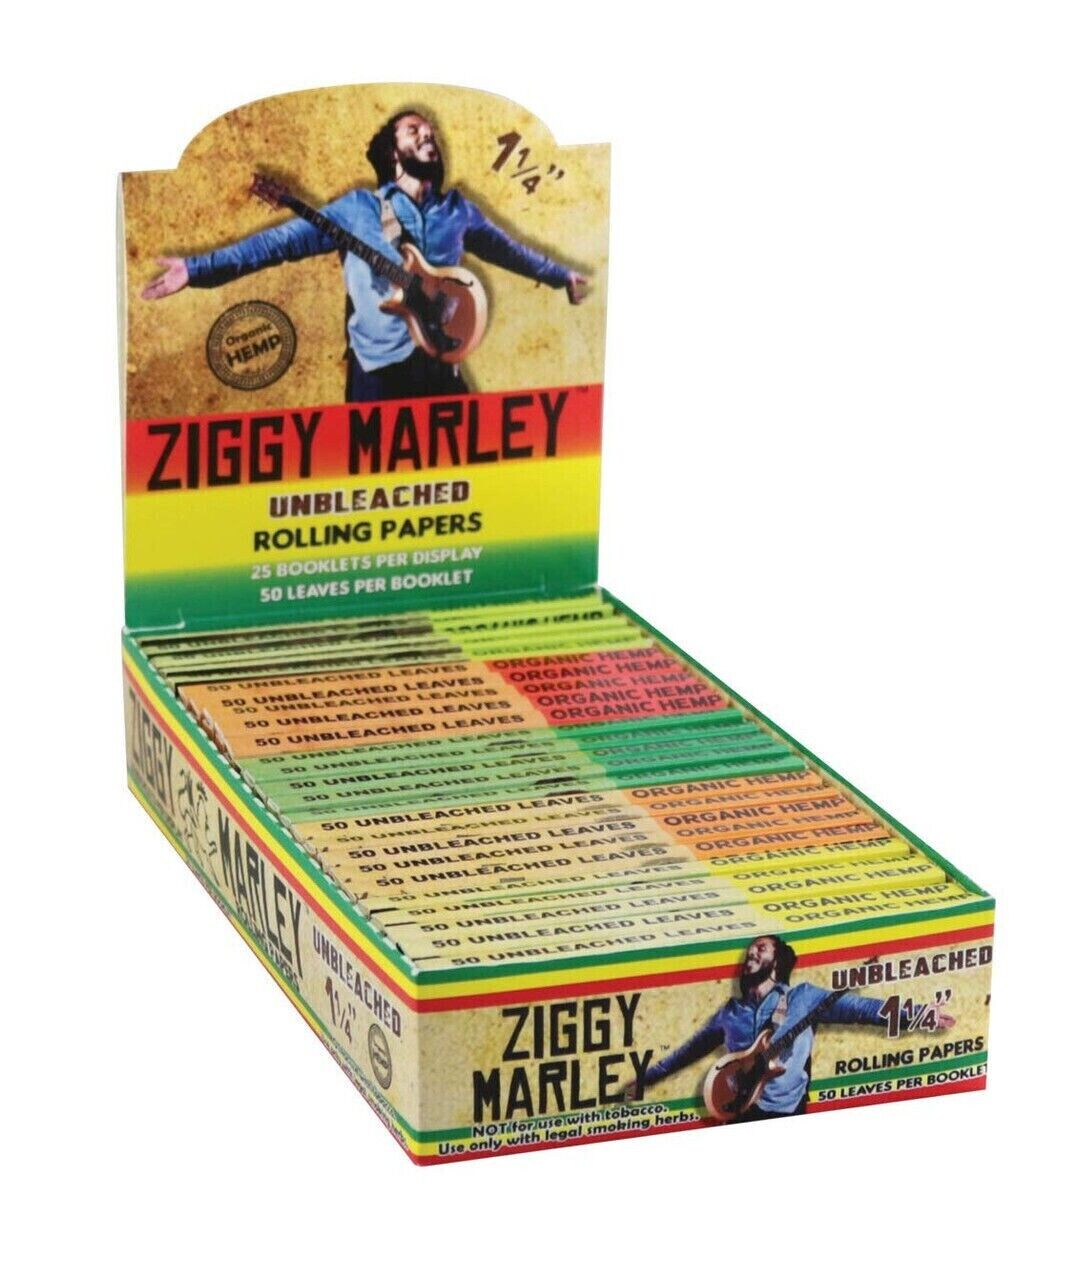 25 Booklets Disp (50 Leaves/booklet)Ziggy Marley Unbleached Rolling Papers 1 1/4